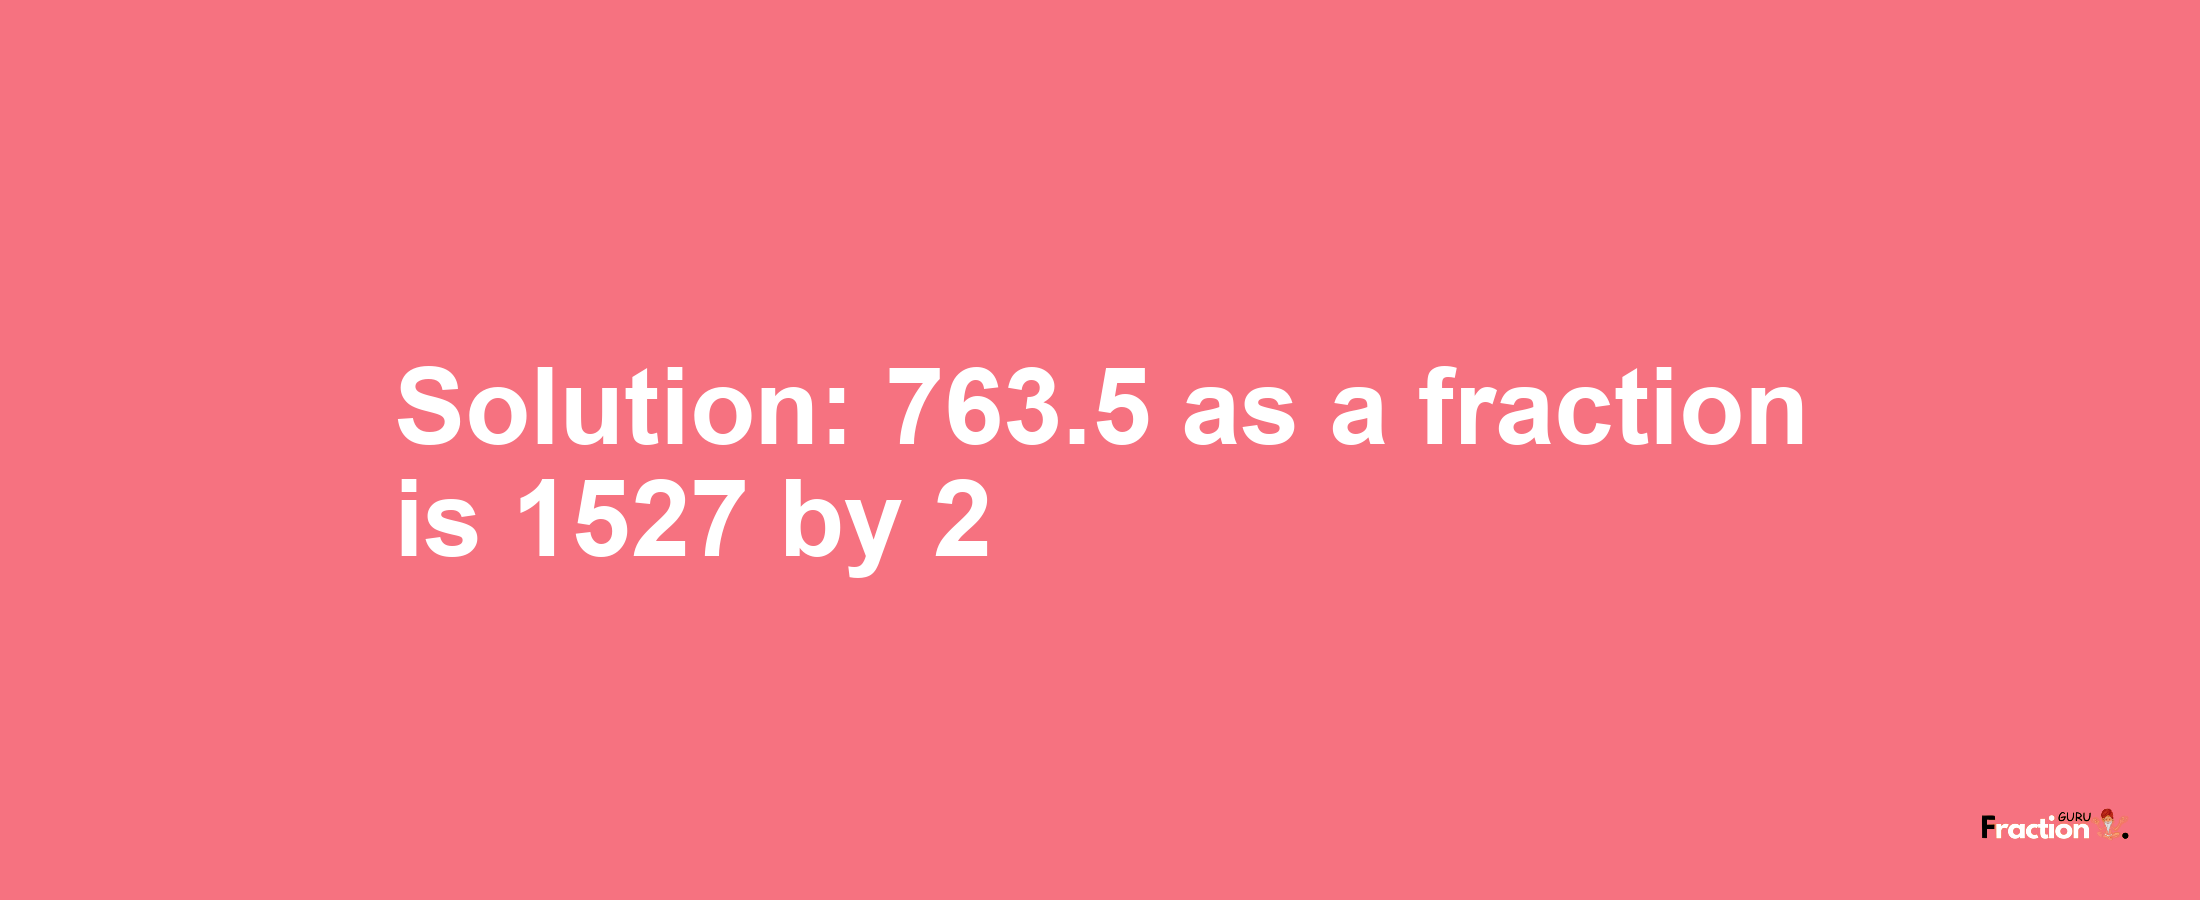 Solution:763.5 as a fraction is 1527/2